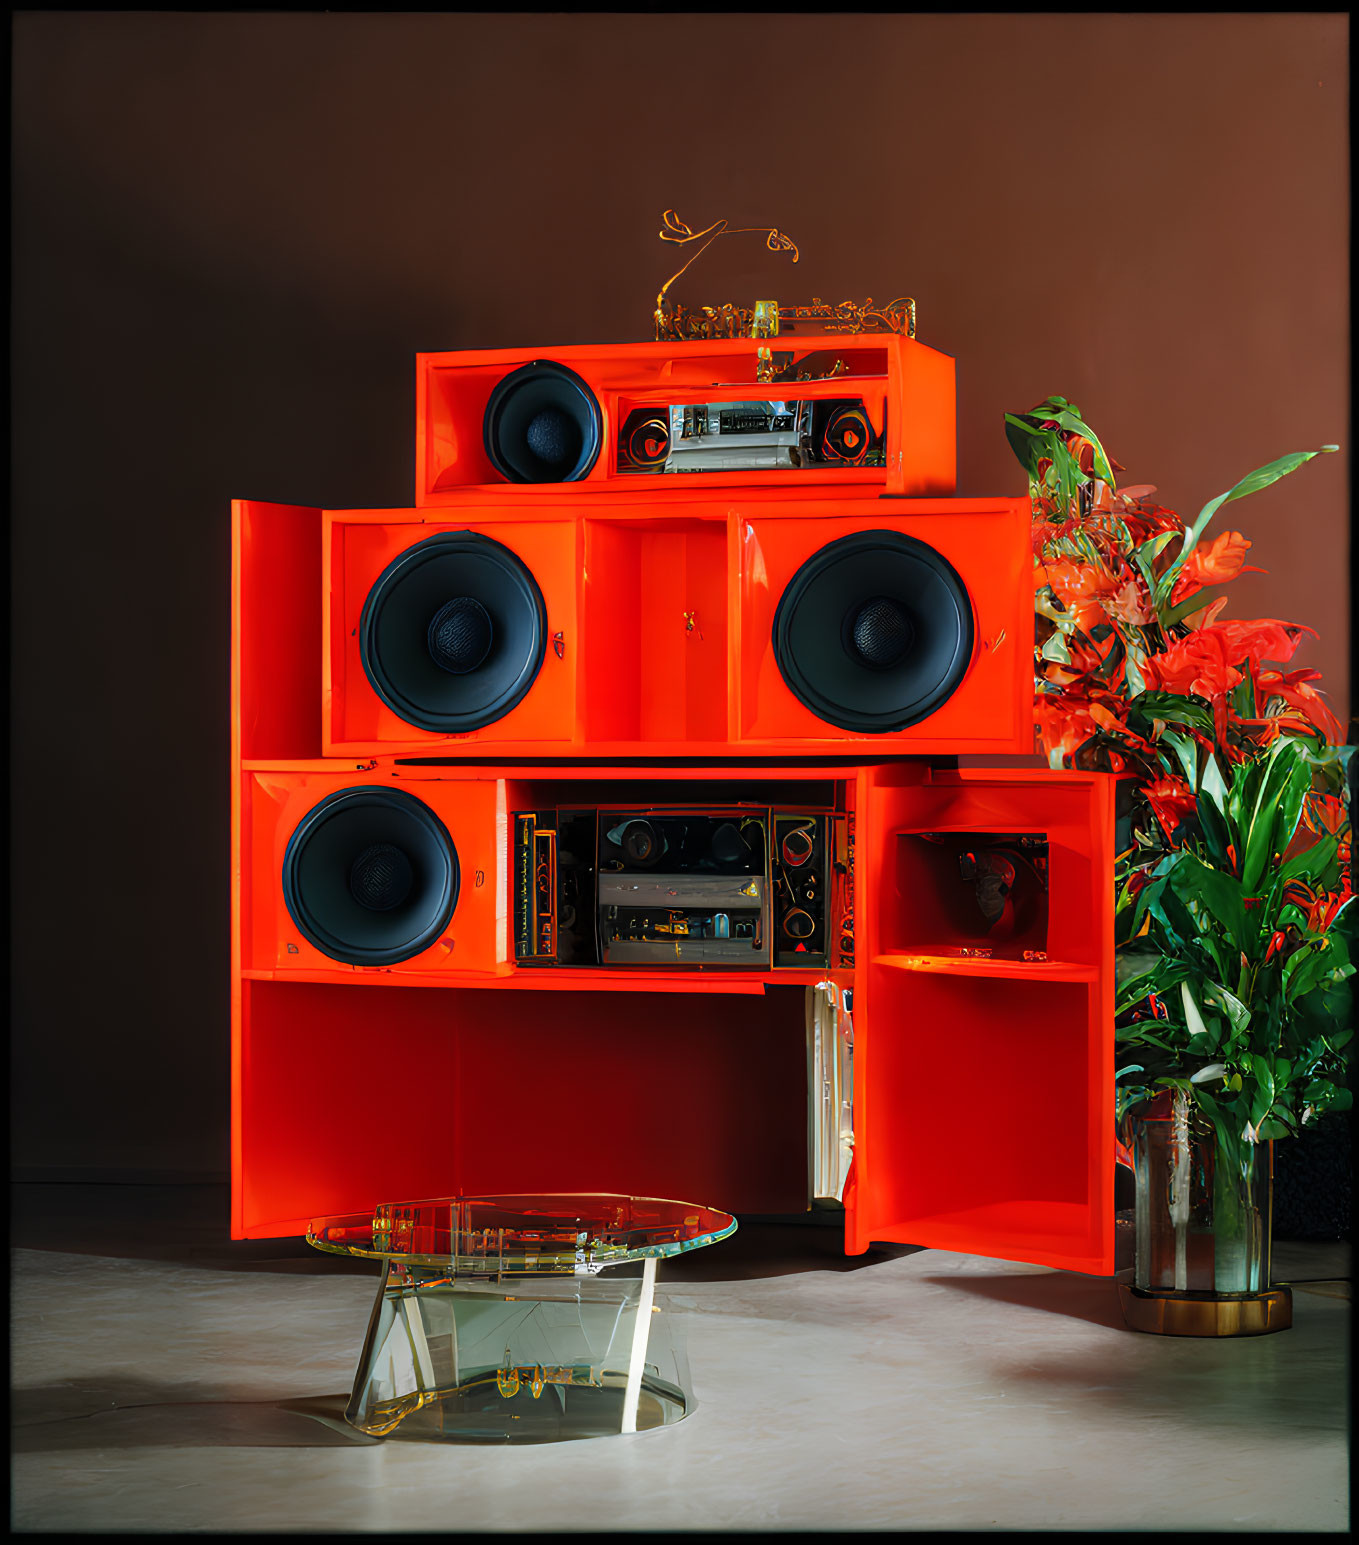 Vibrant orange shelving unit with vintage electronics, speakers, and red flowers on dark background.